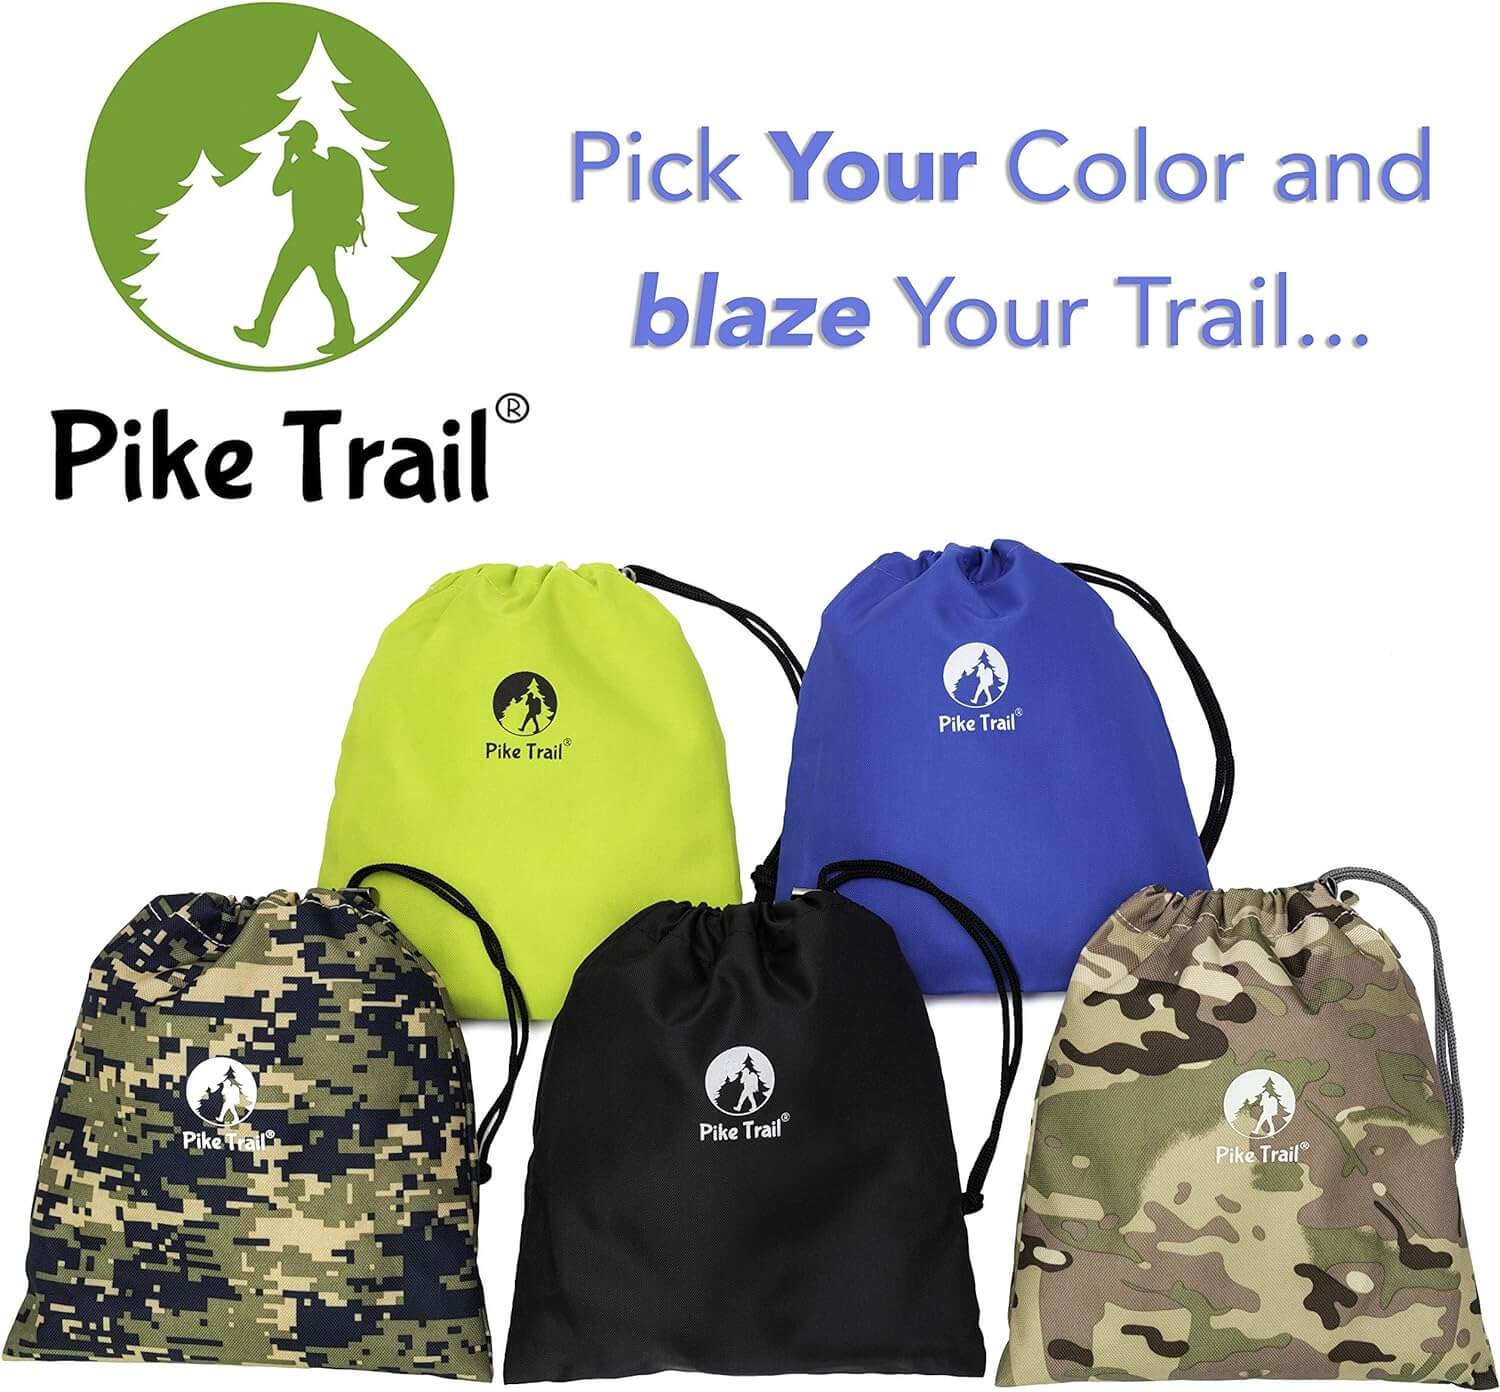 Shop The Latest >Pike Trail Waterproof and Adjustable Boot Gaiters For Hiking > *Only $41.99*> From The Top Brand > *Pike Traill* > Shop Now and Get Free Shipping On Orders Over $45.00 >*Shop Earth Foot*